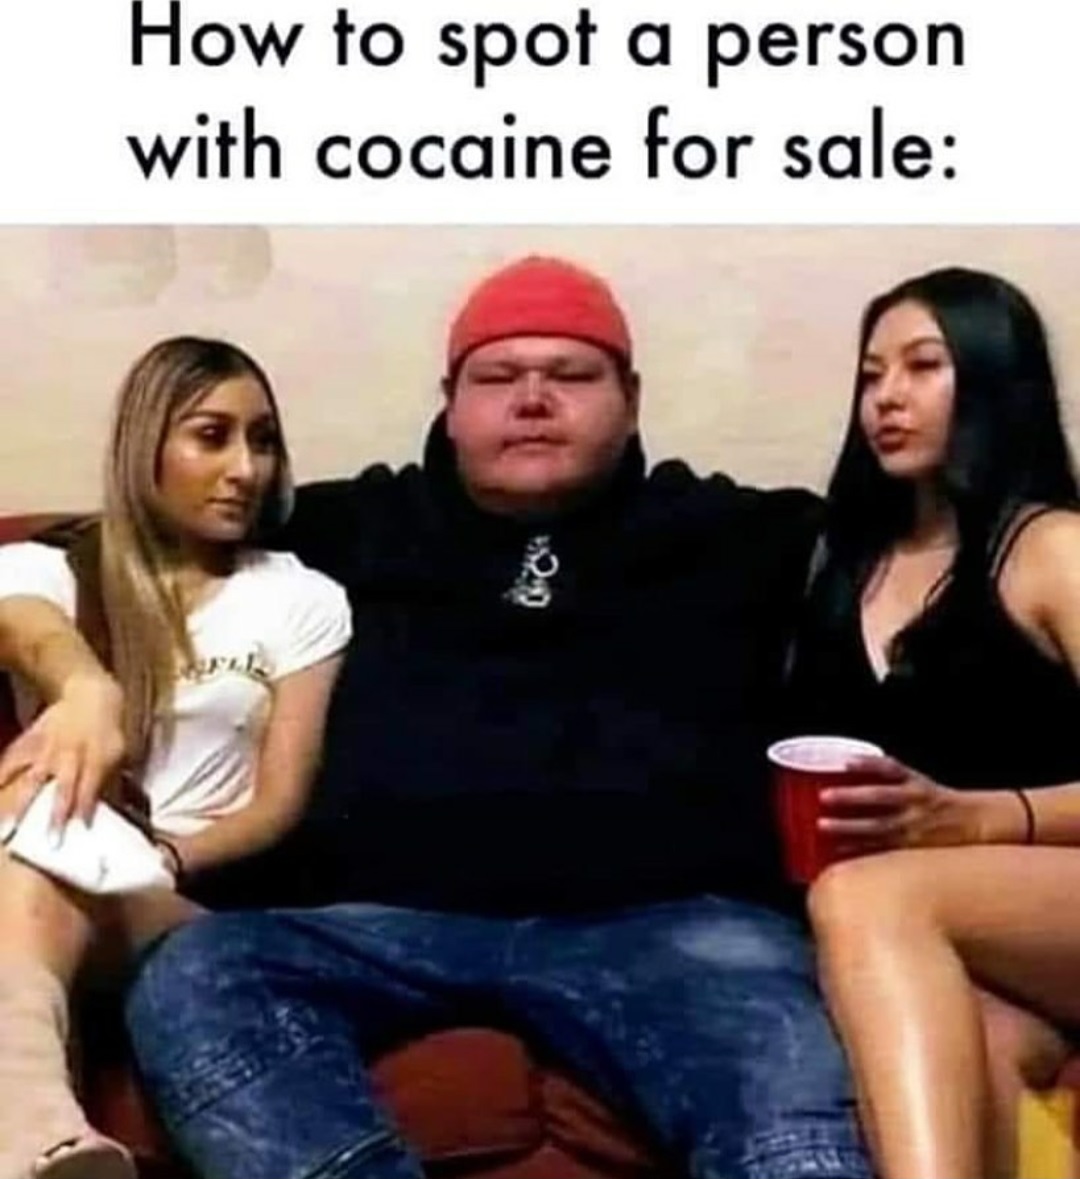 girl - How to spot a person with cocaine for sale